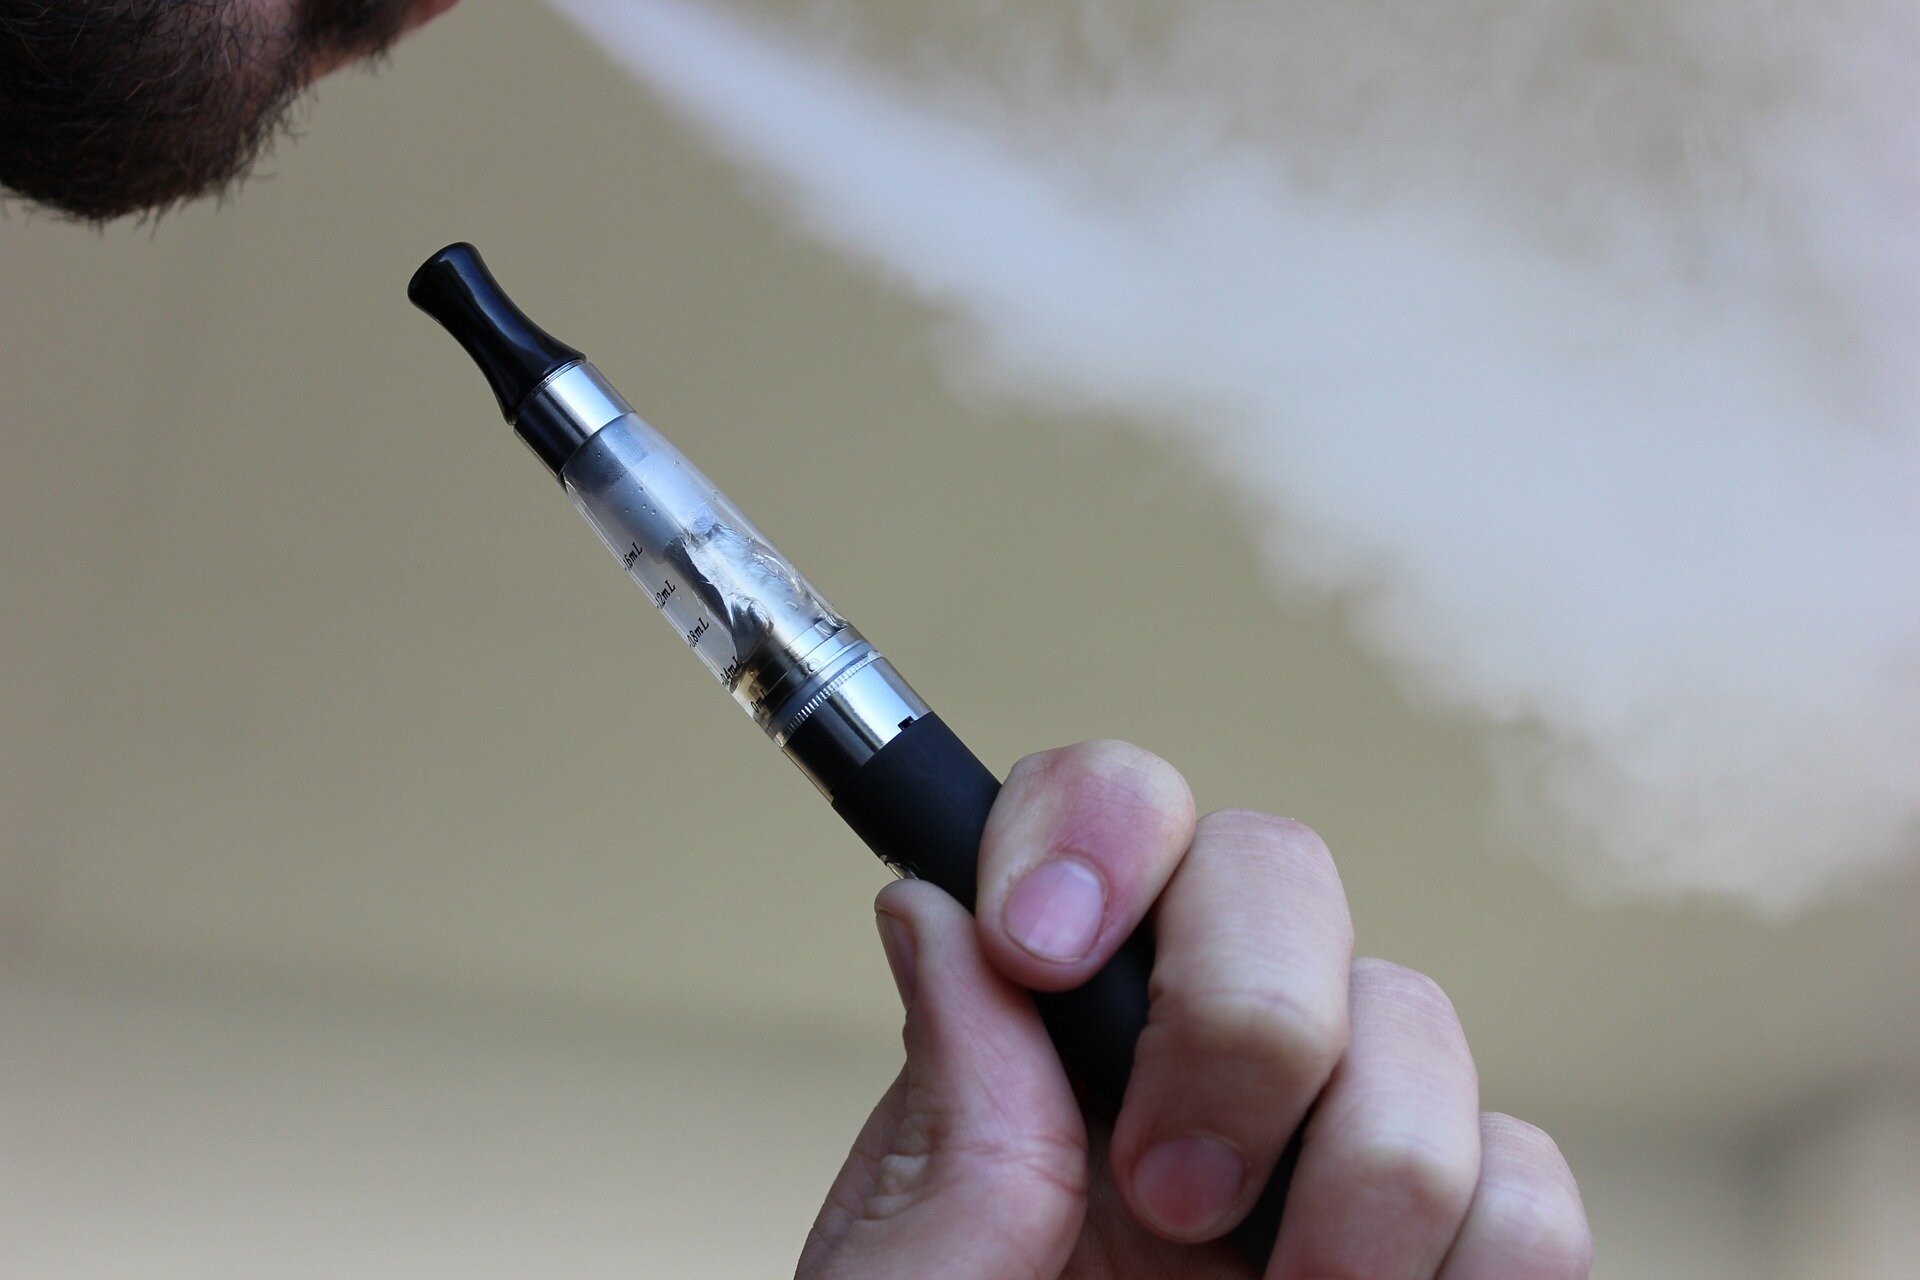 #Action is needed to reduce e-cigarette use among adolescents to lower lifetime CVD risk